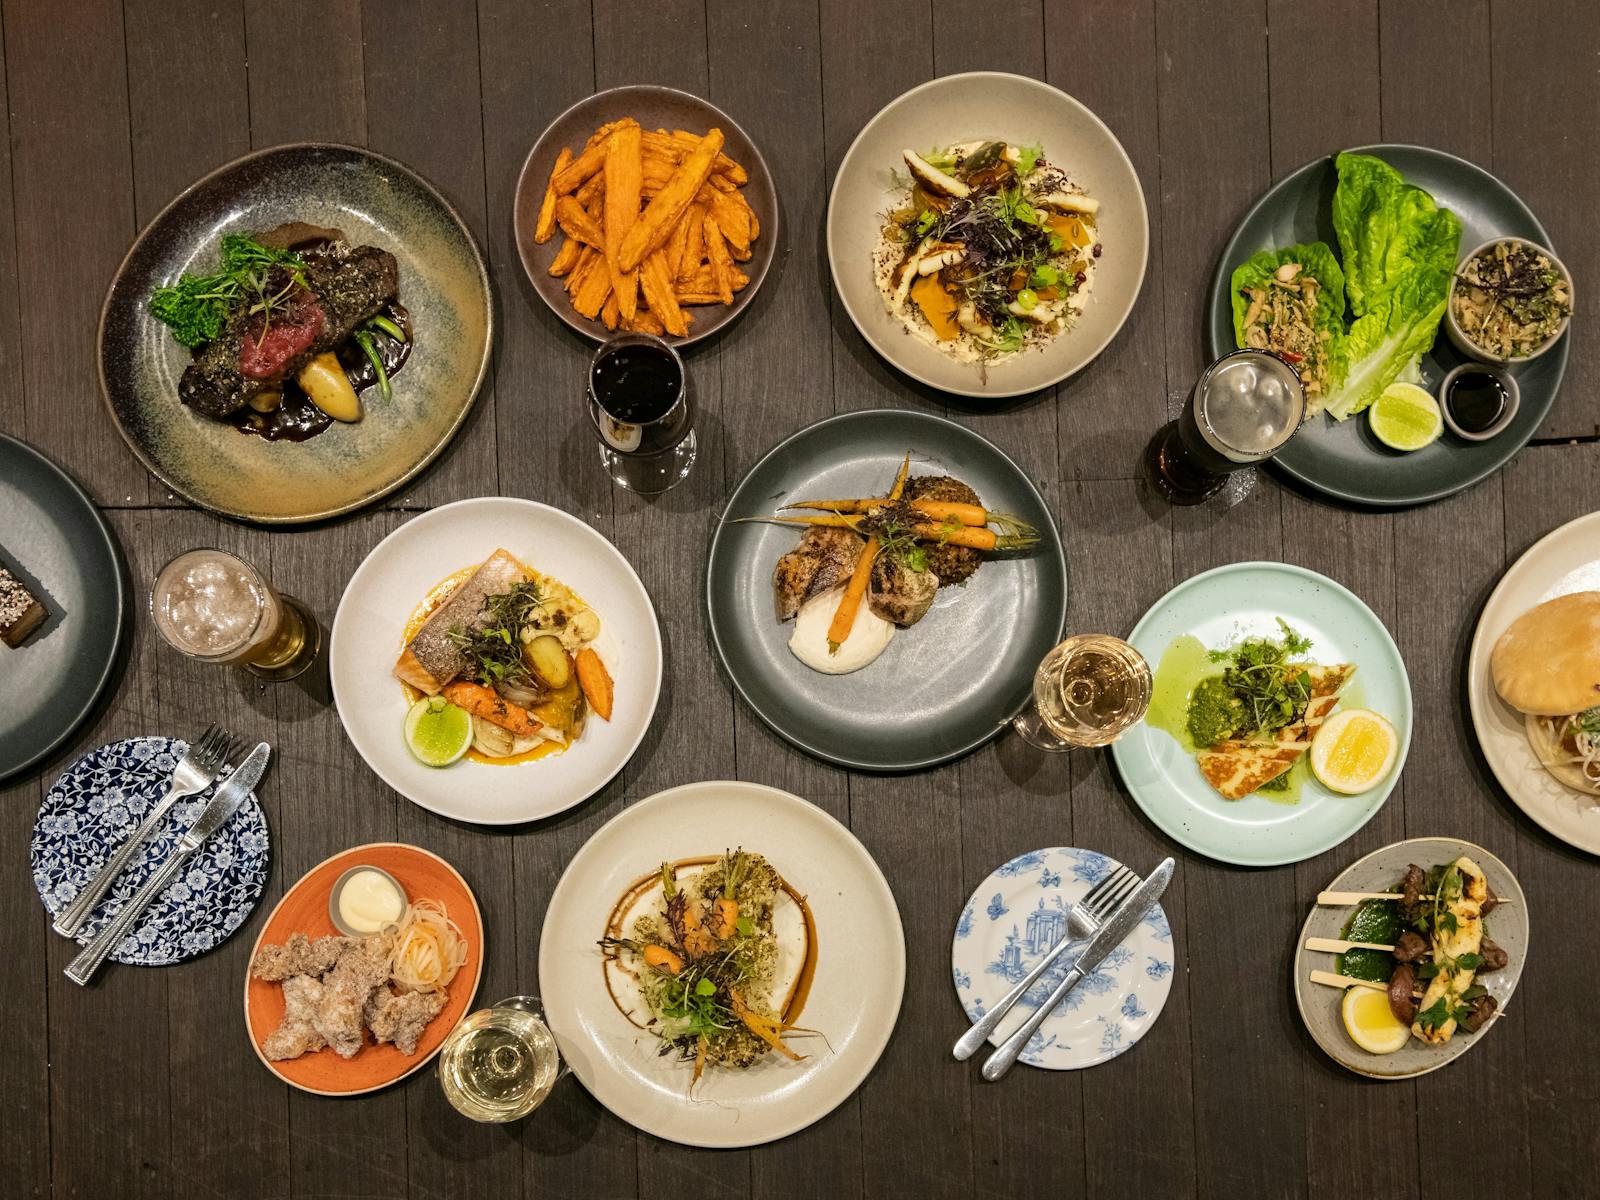 Image for Tasting Australia | Australiana Chef’s Table at The Mile End